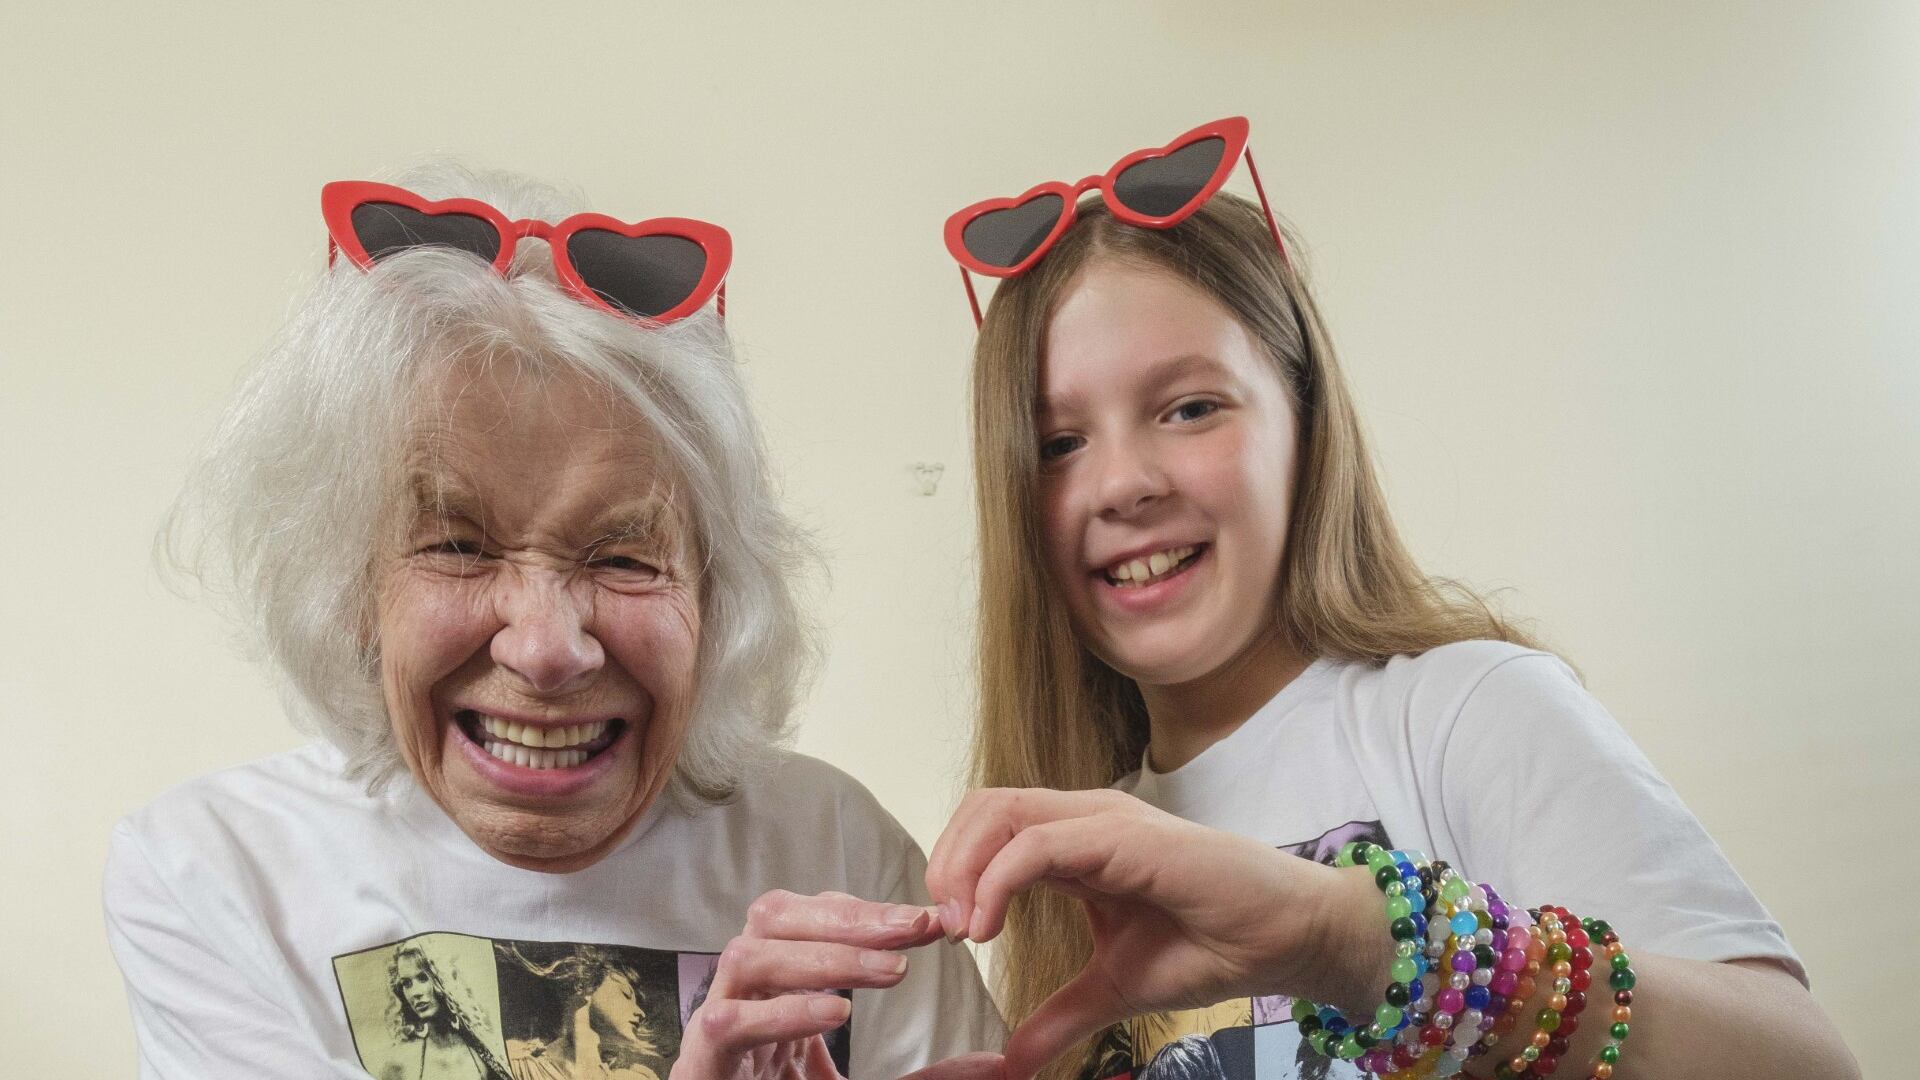 Devon, 11, and her great-grandmother Margaret, 92, with their friendship bracelets